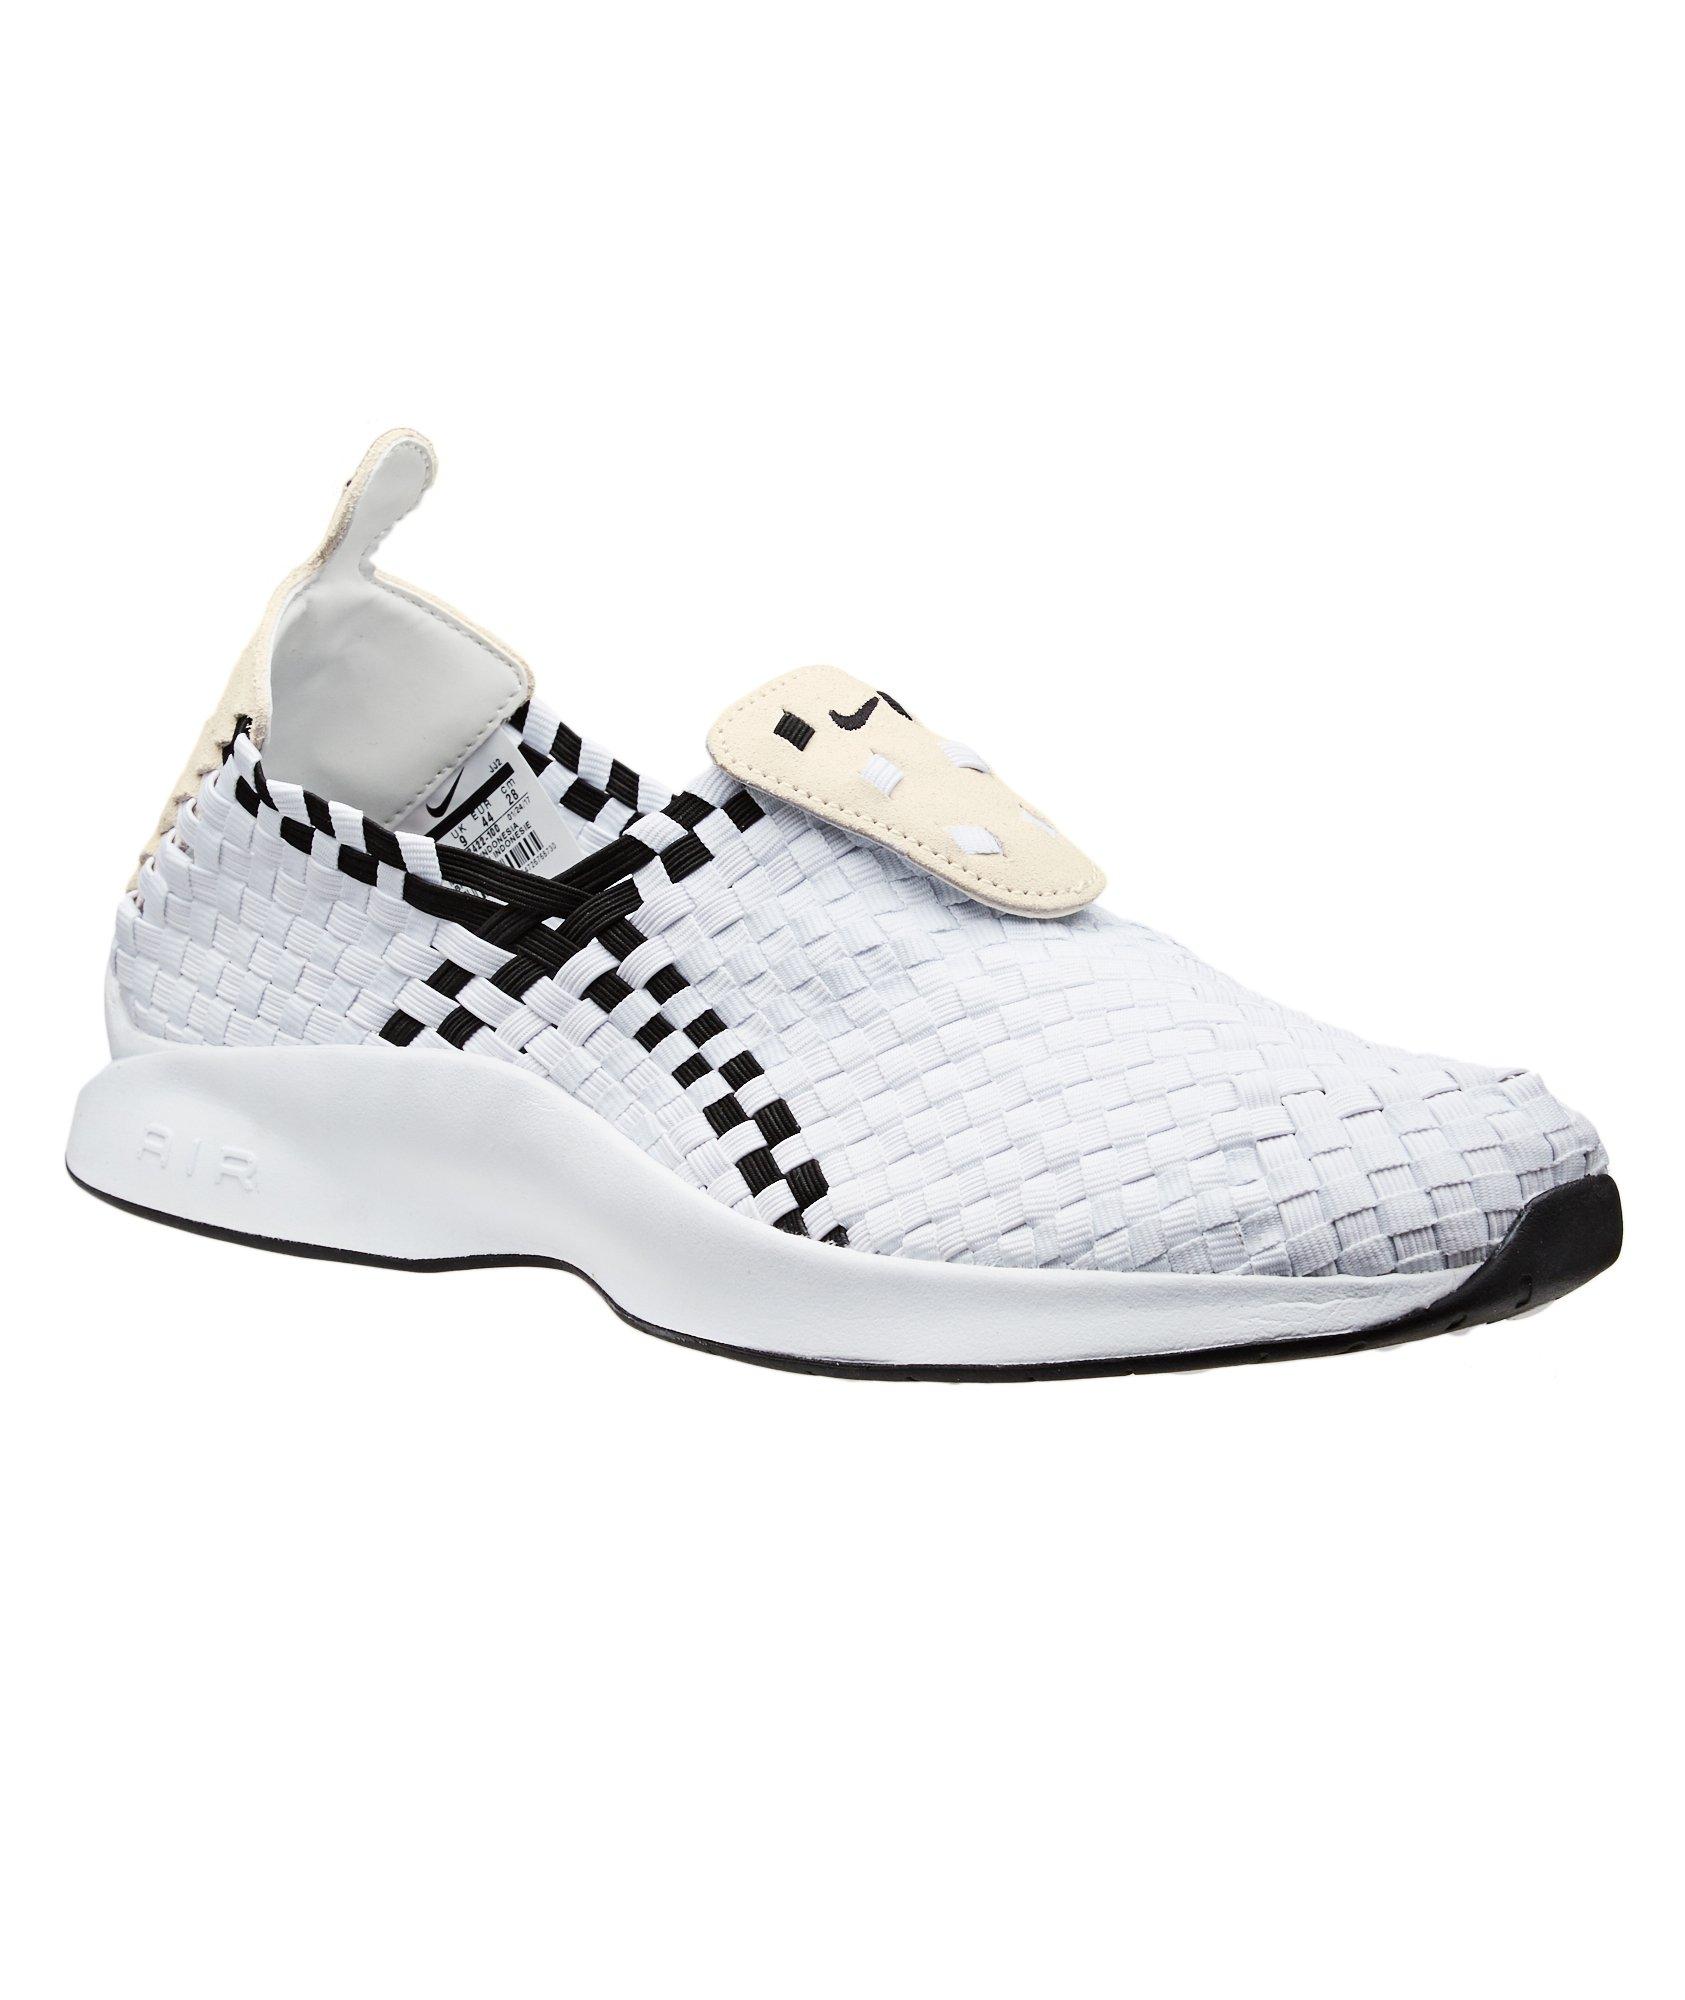 Air Woven Sneakers image 0